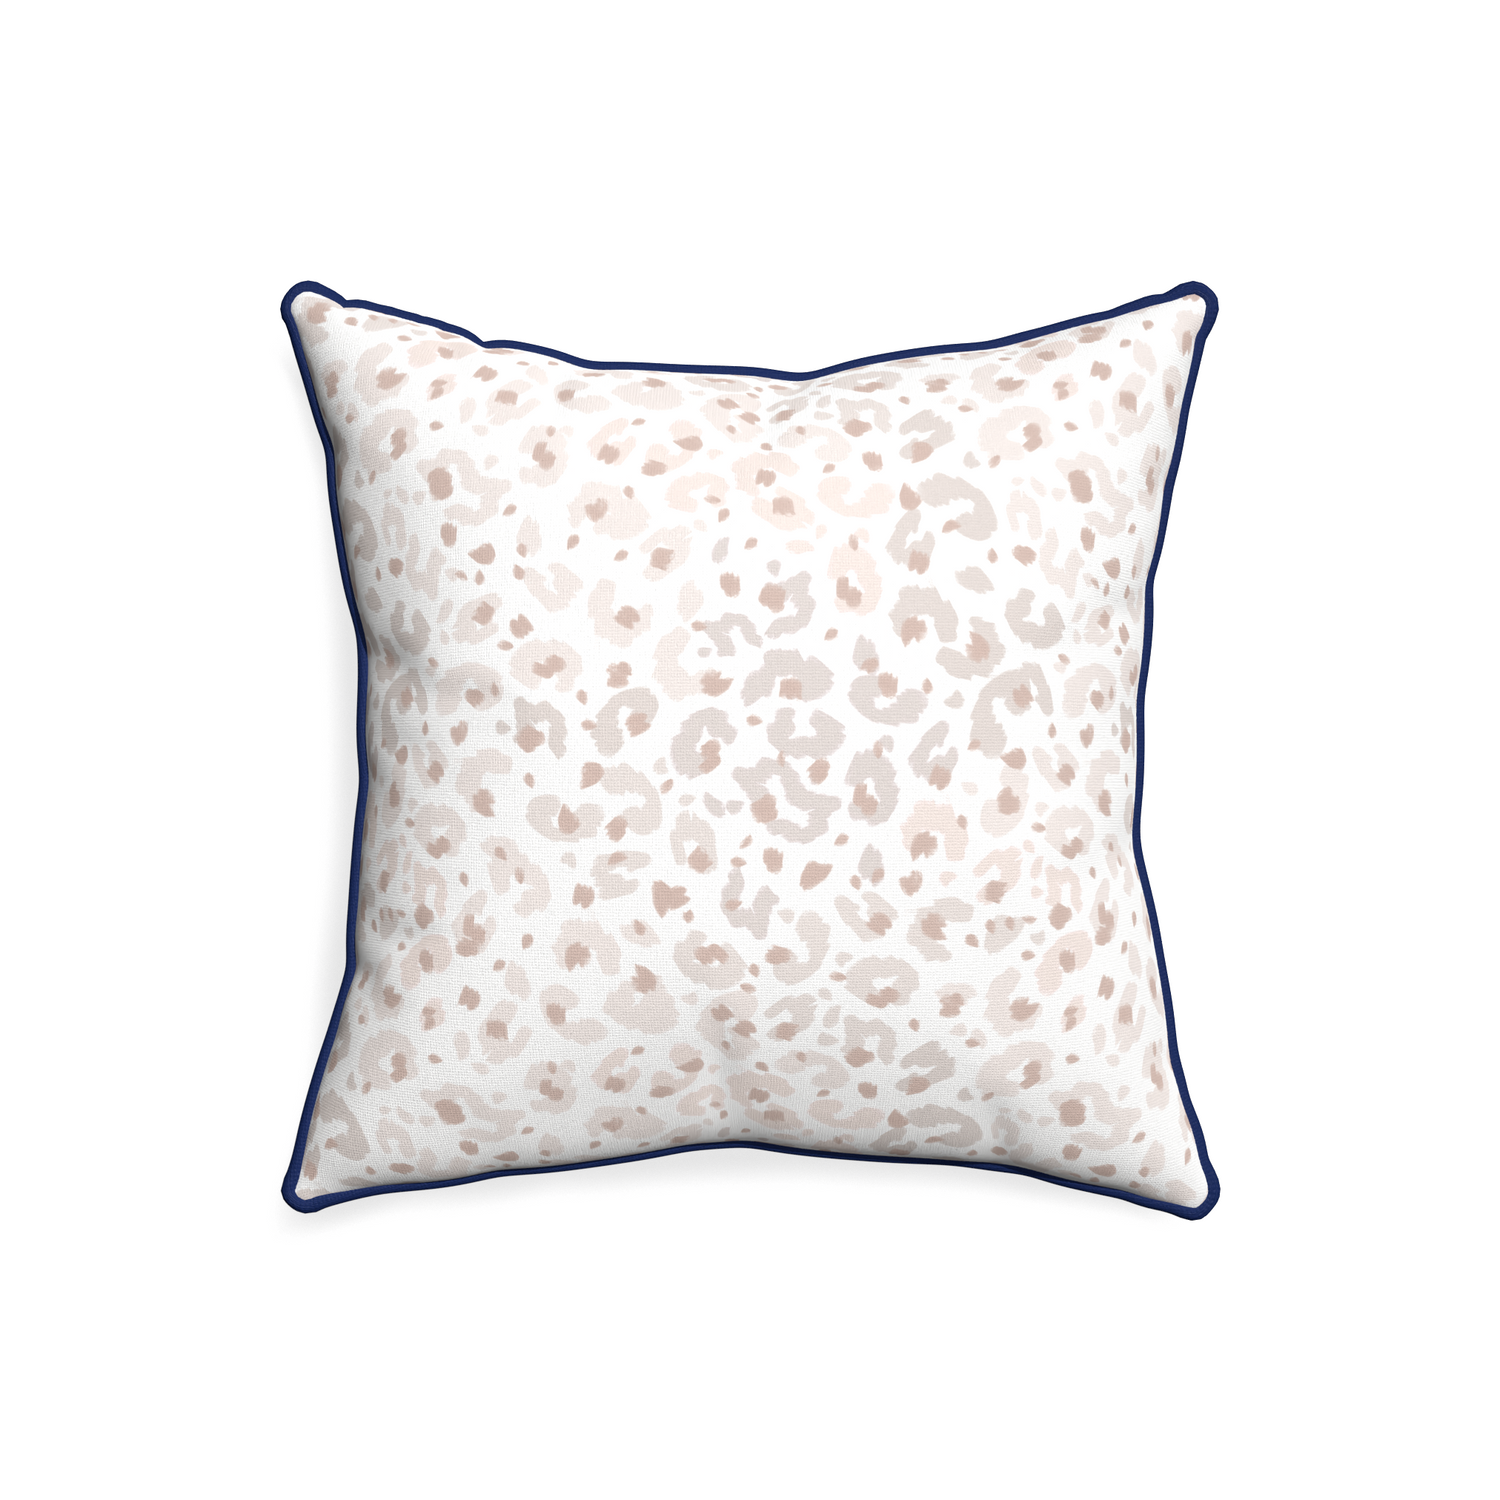 20-square rosie custom beige animal printpillow with midnight piping on white background